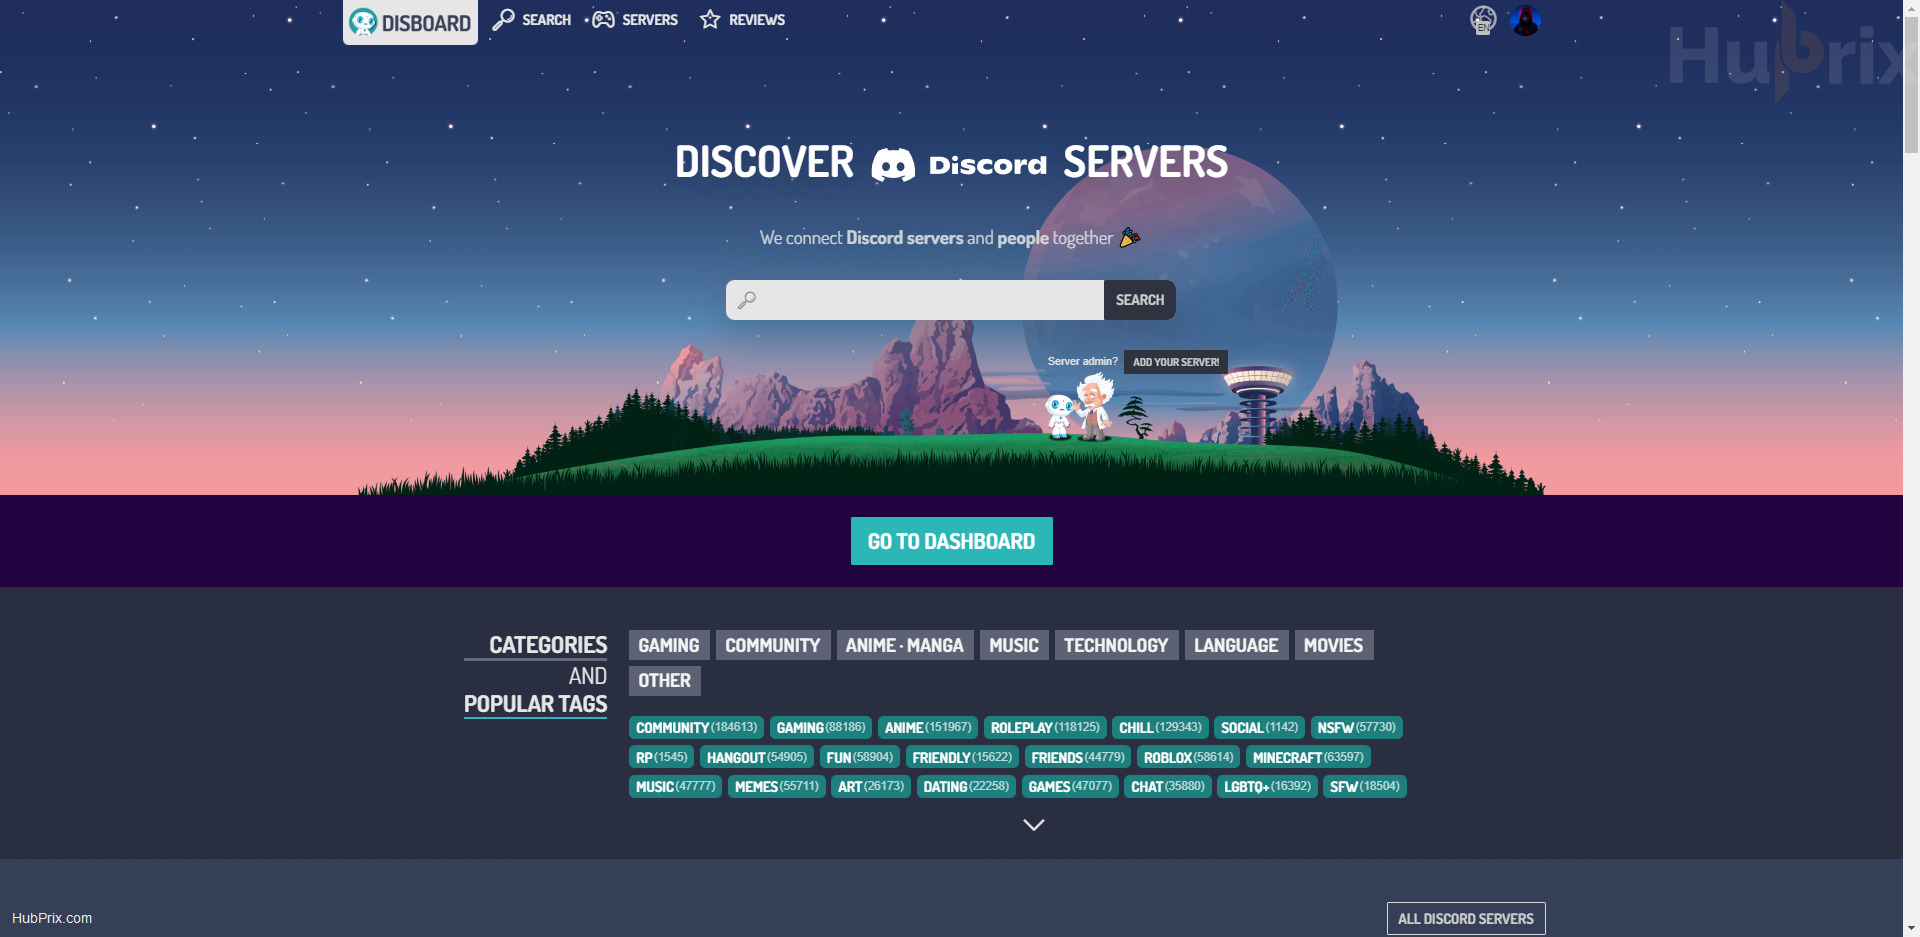 Disboard HomePage Overview